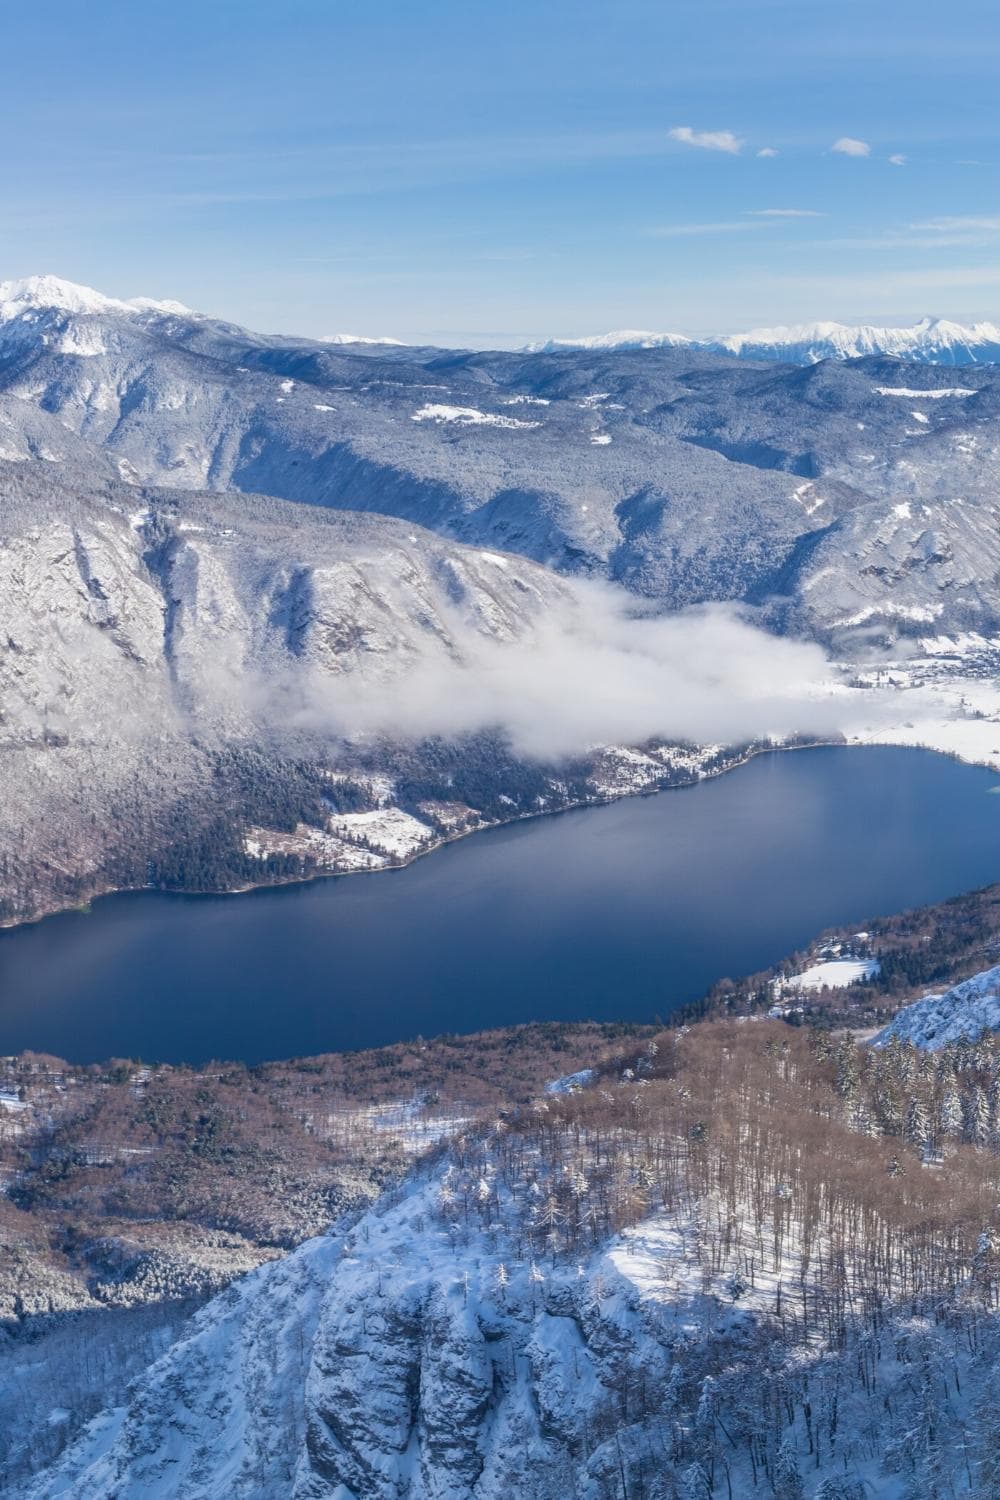 View from Vogel of Lake Bohinj